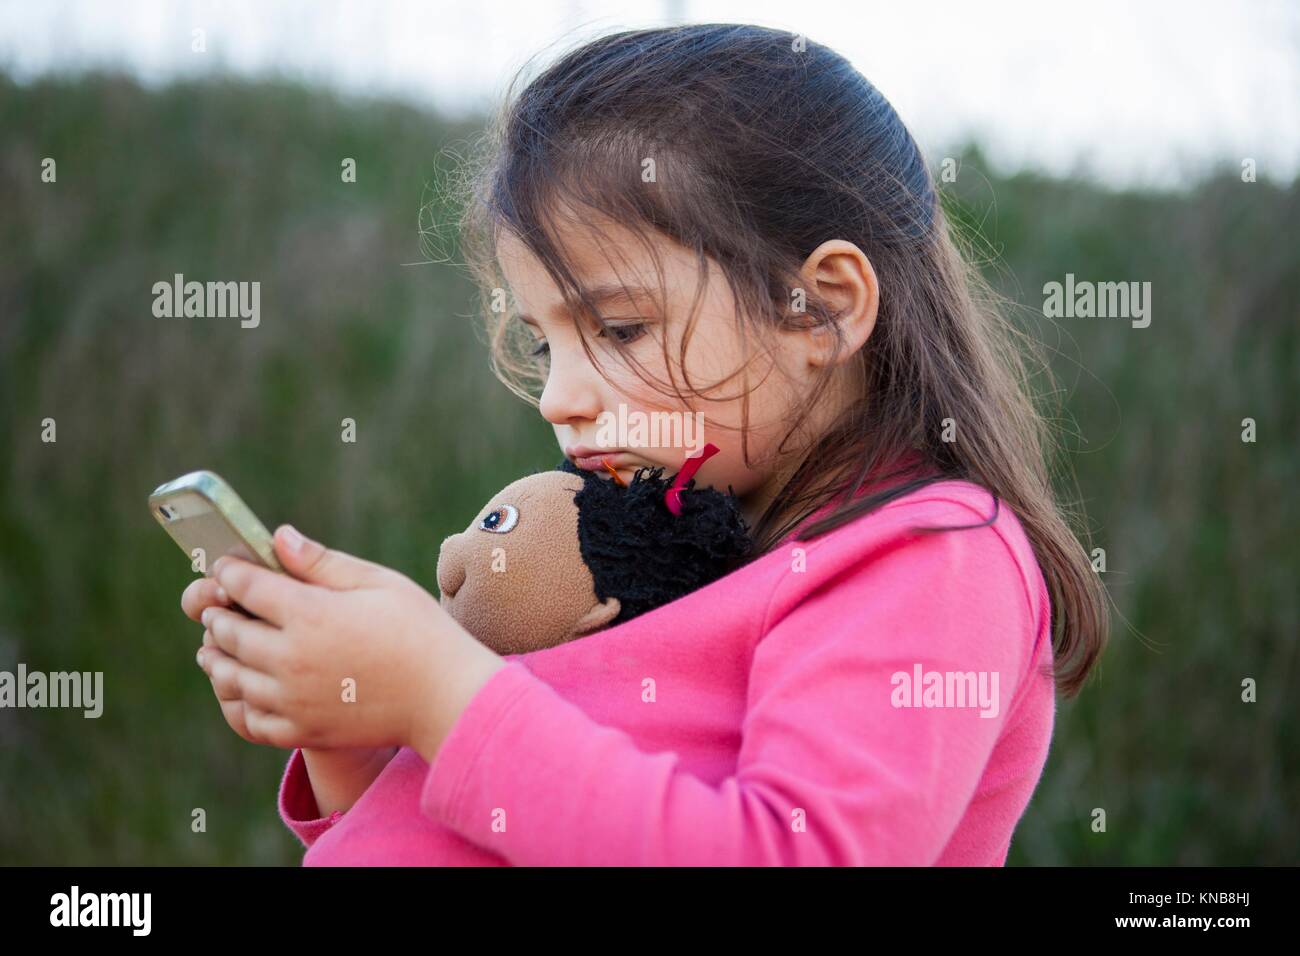 Little girl playing with mobile phone and holding her doll outdoor. Stock Photo